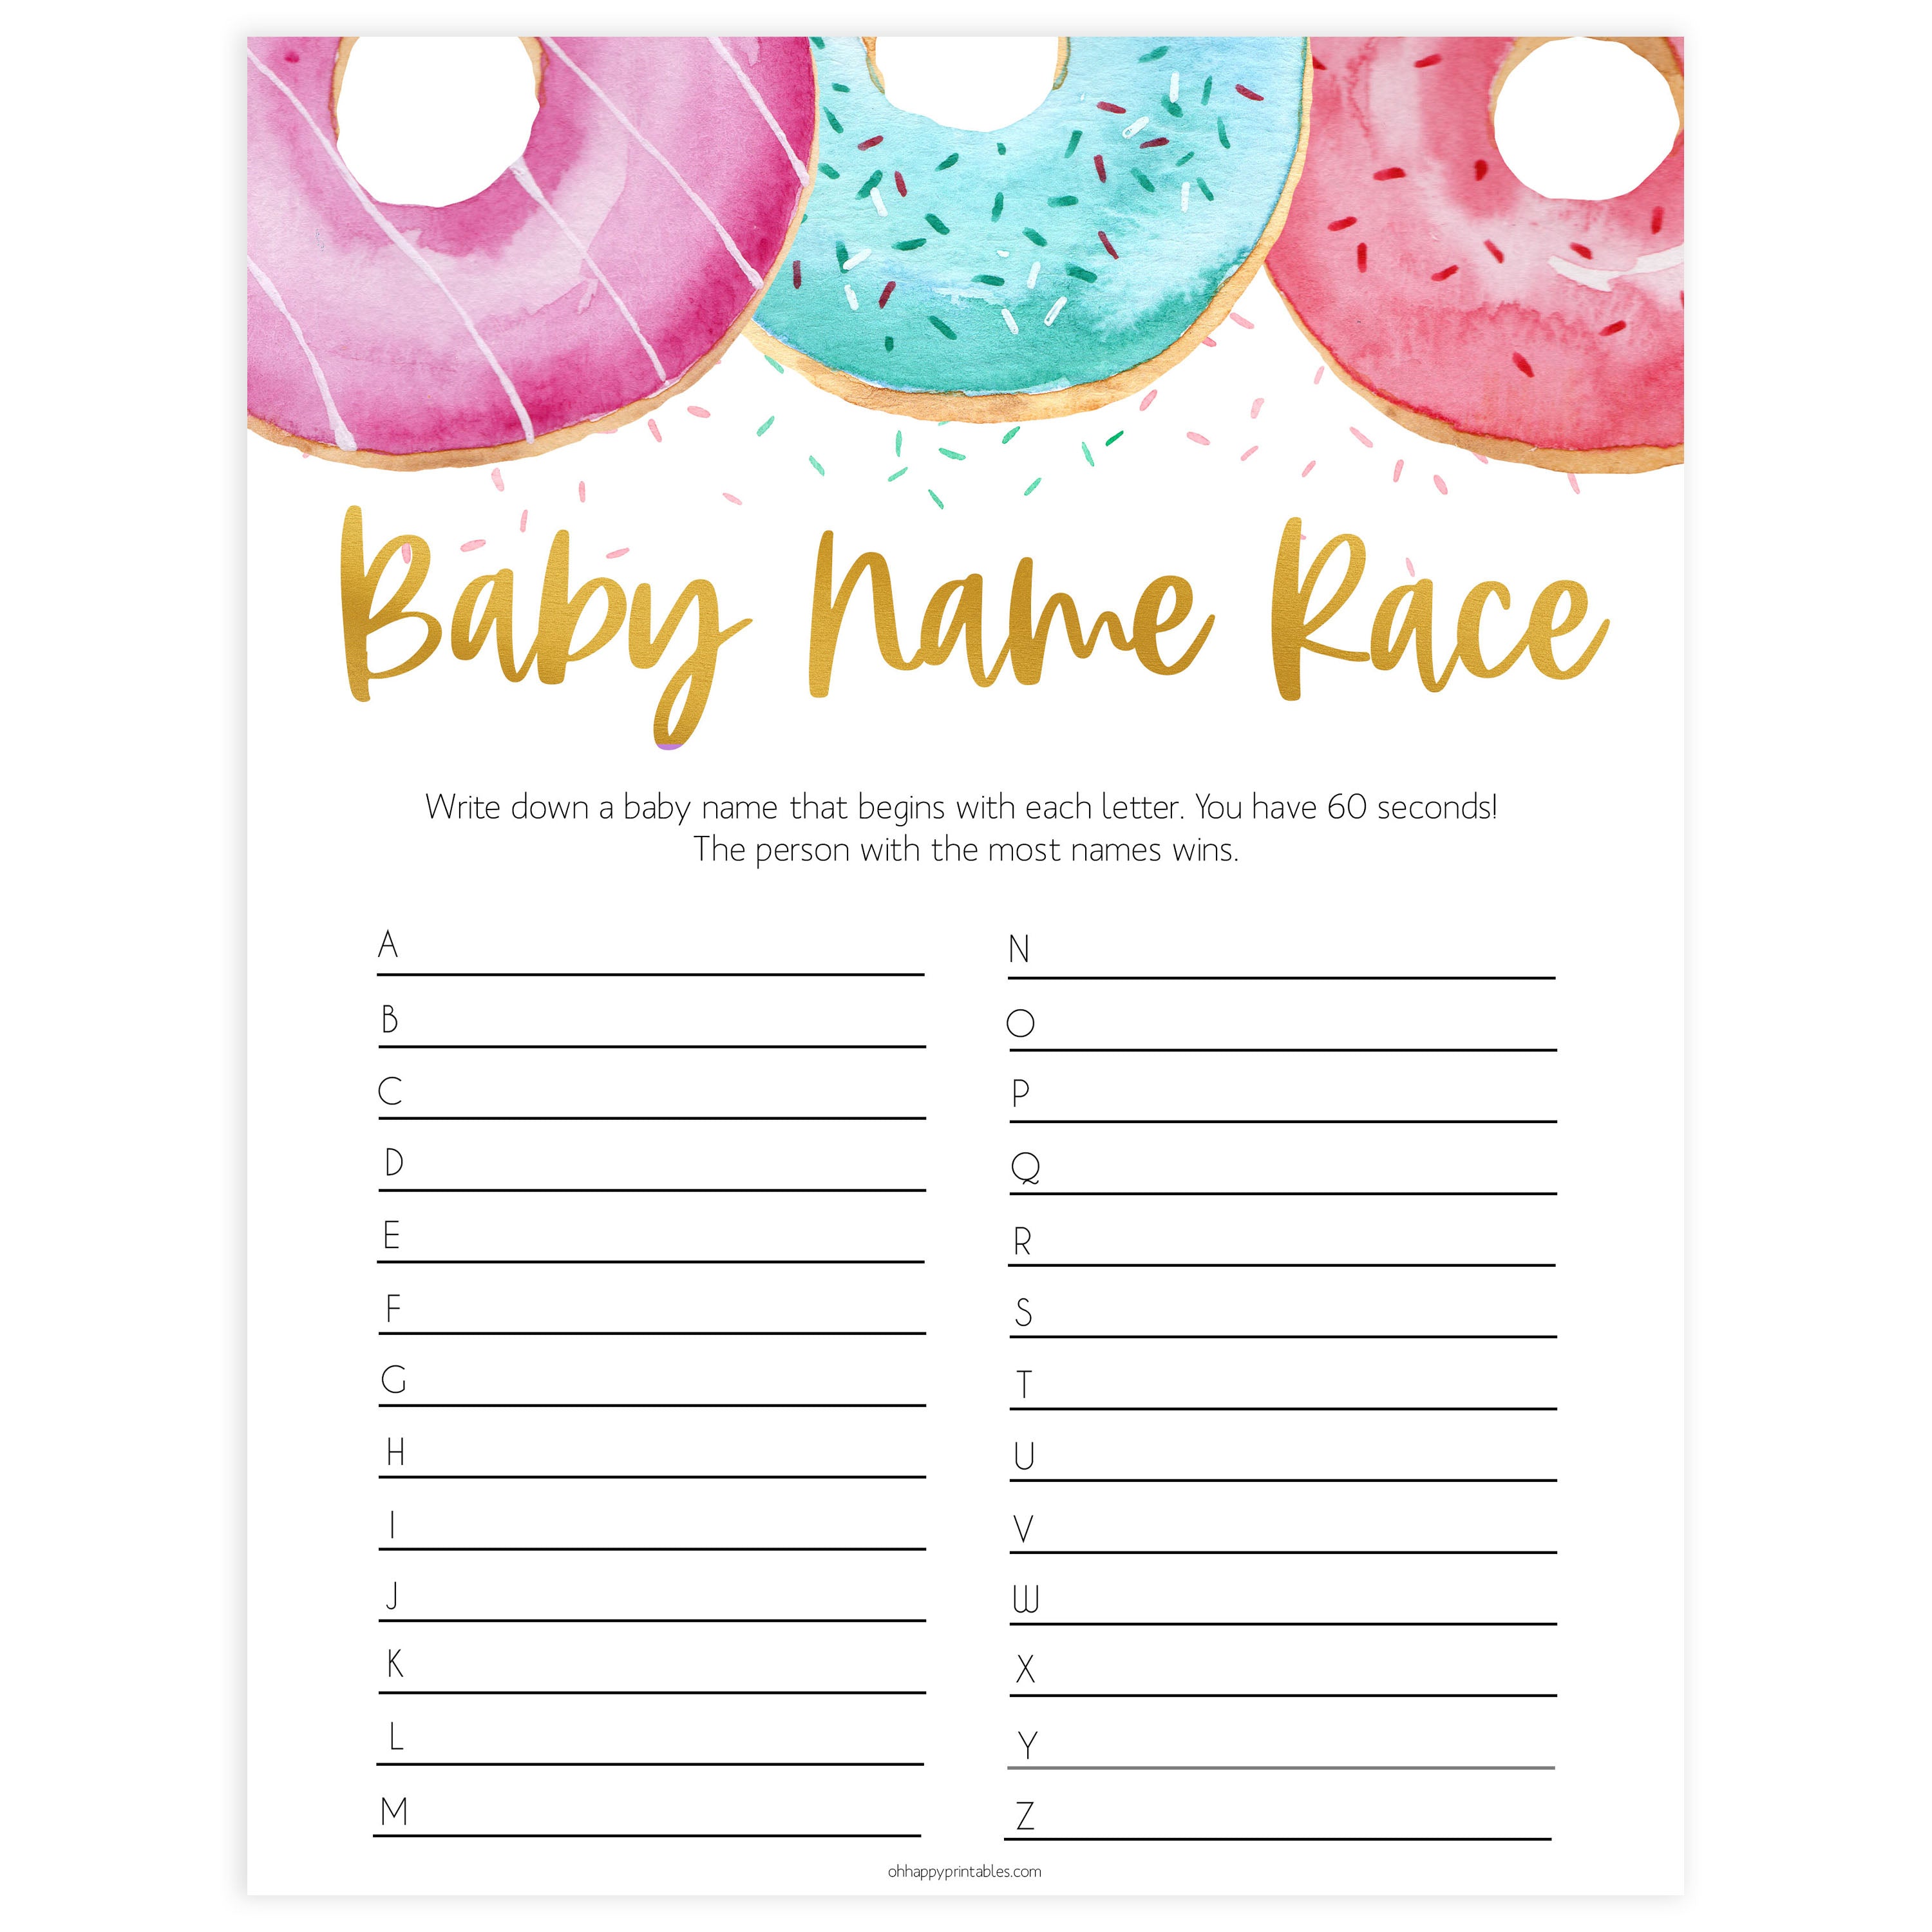 baby name race game, Printable baby shower games, donut baby games, baby shower games, fun baby shower ideas, top baby shower ideas, donut sprinkles baby shower, baby shower games, fun donut baby shower ideas